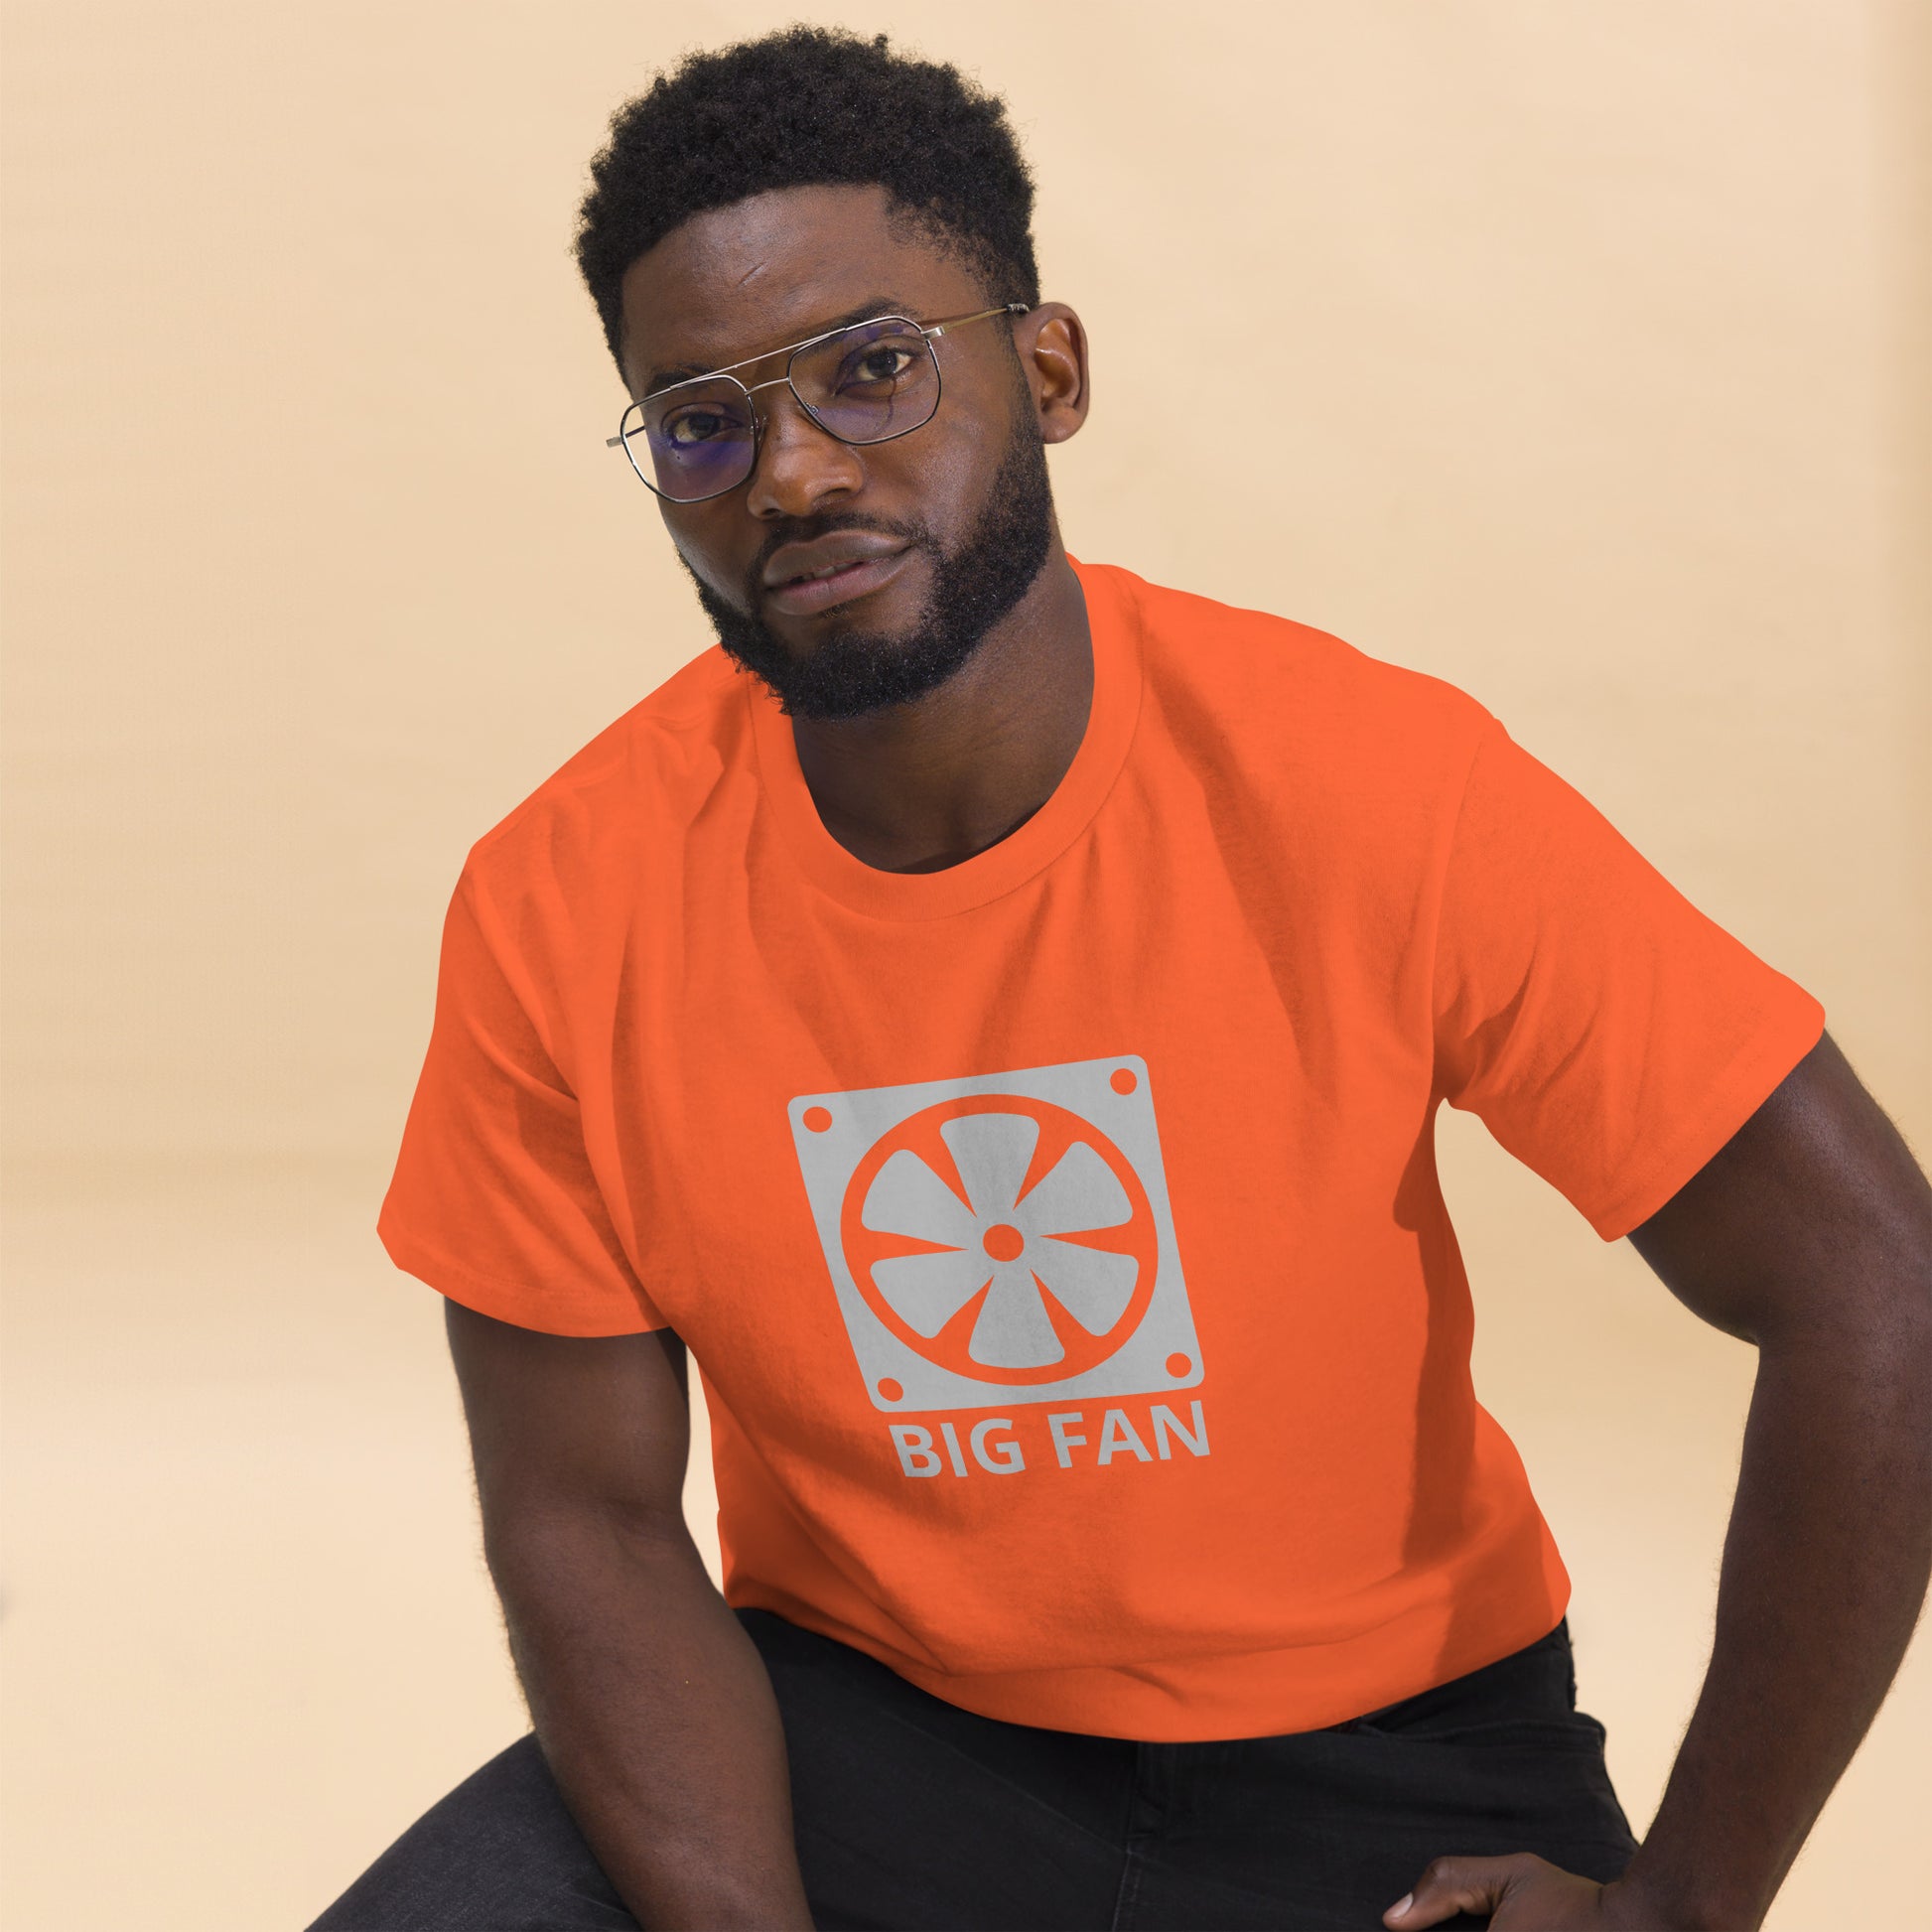 Man with orange t-shirt with image of a big computer fan and the text "BIG FAN"